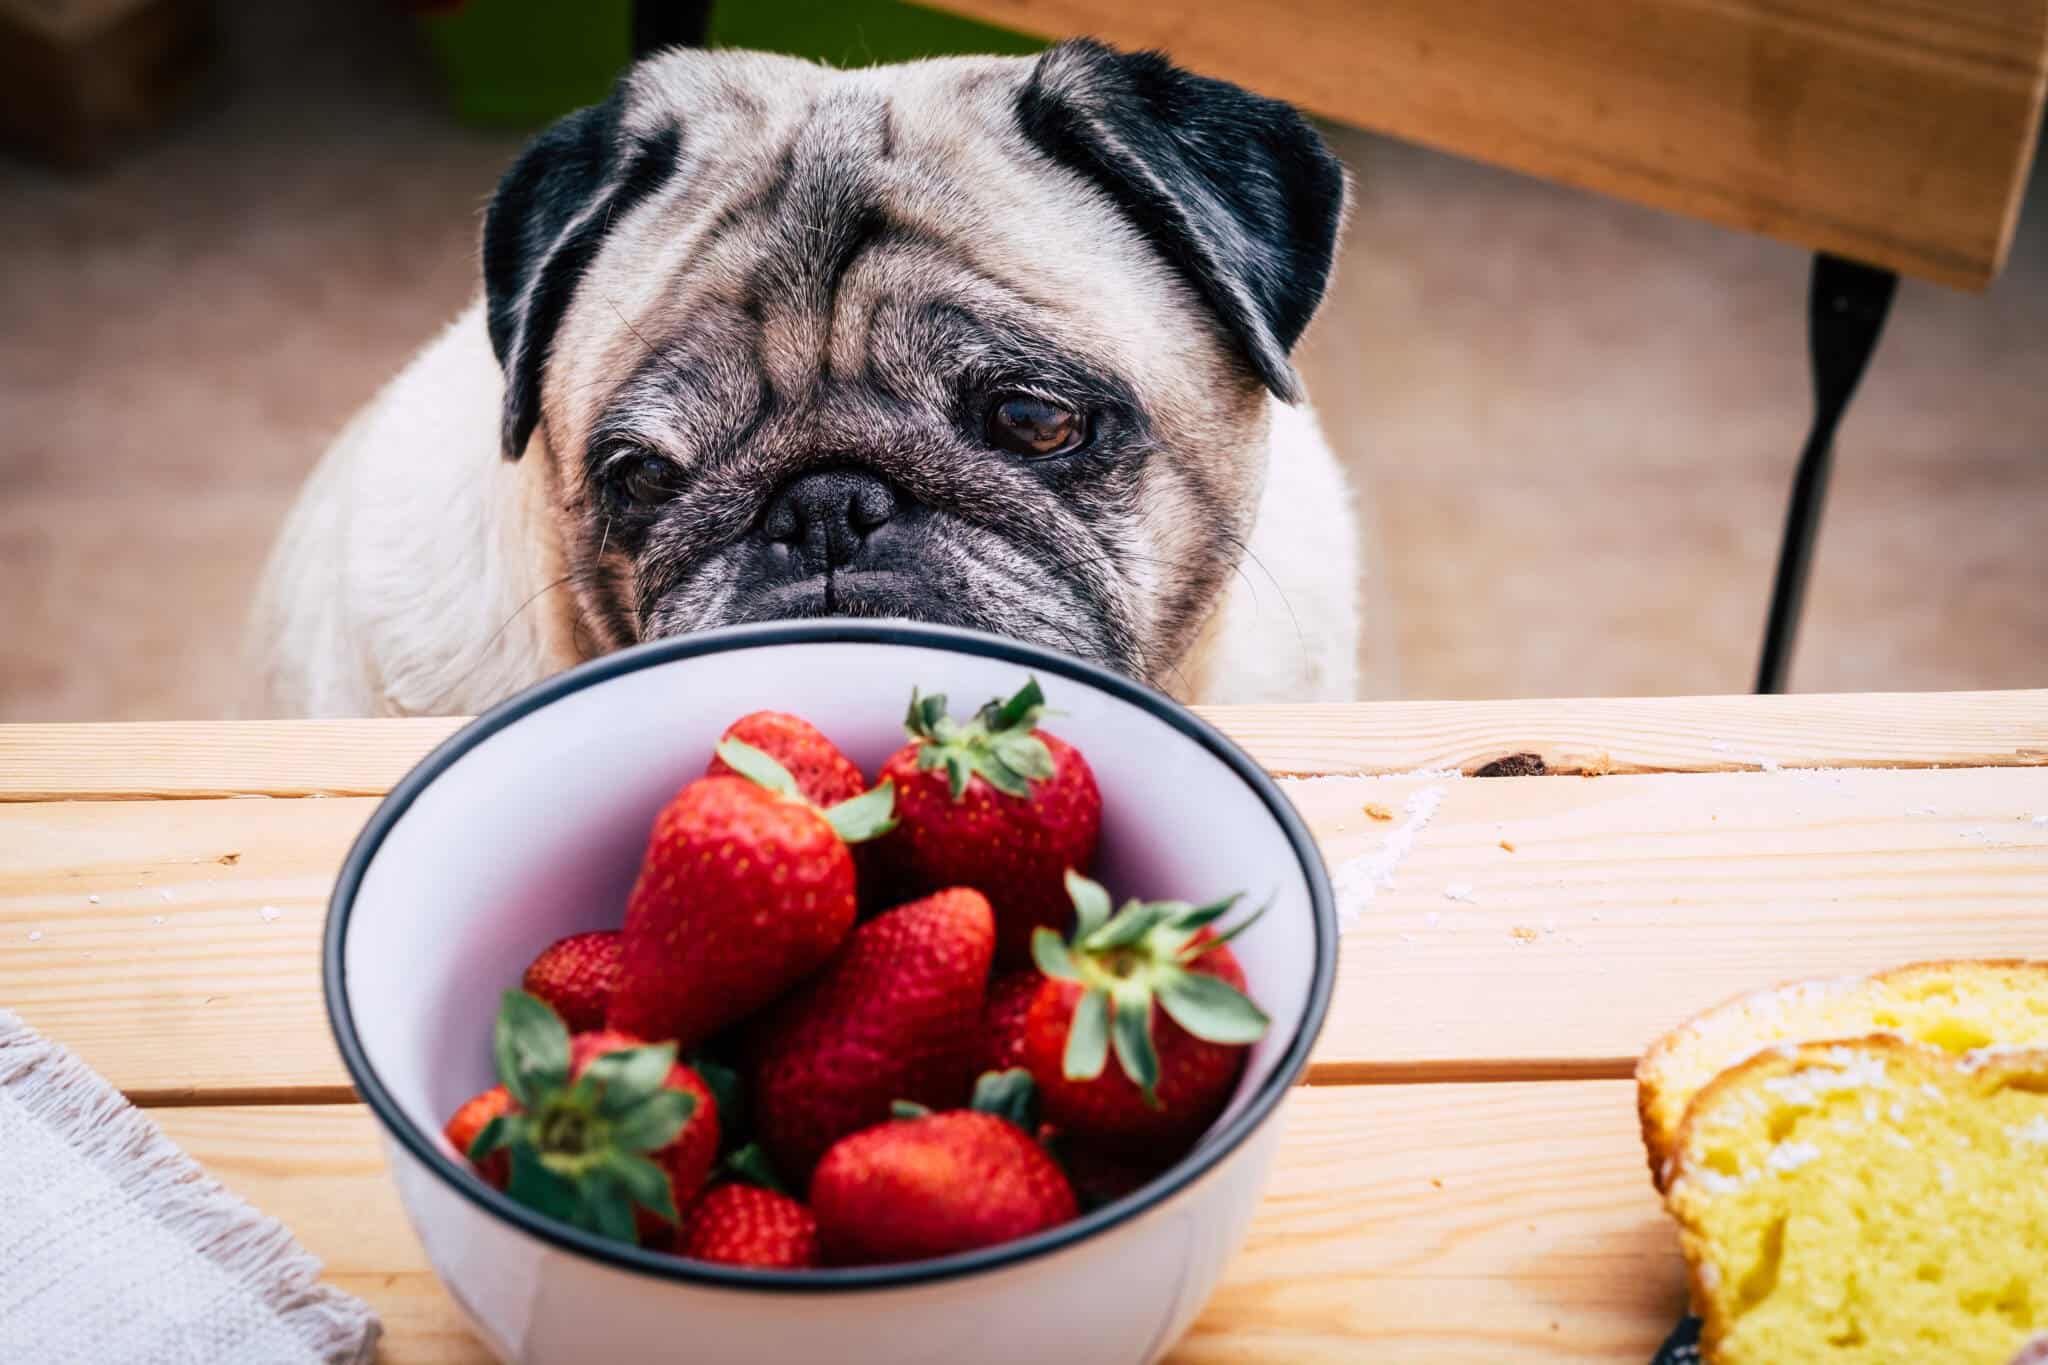 How Many Strawberries Can a Dog Eat?